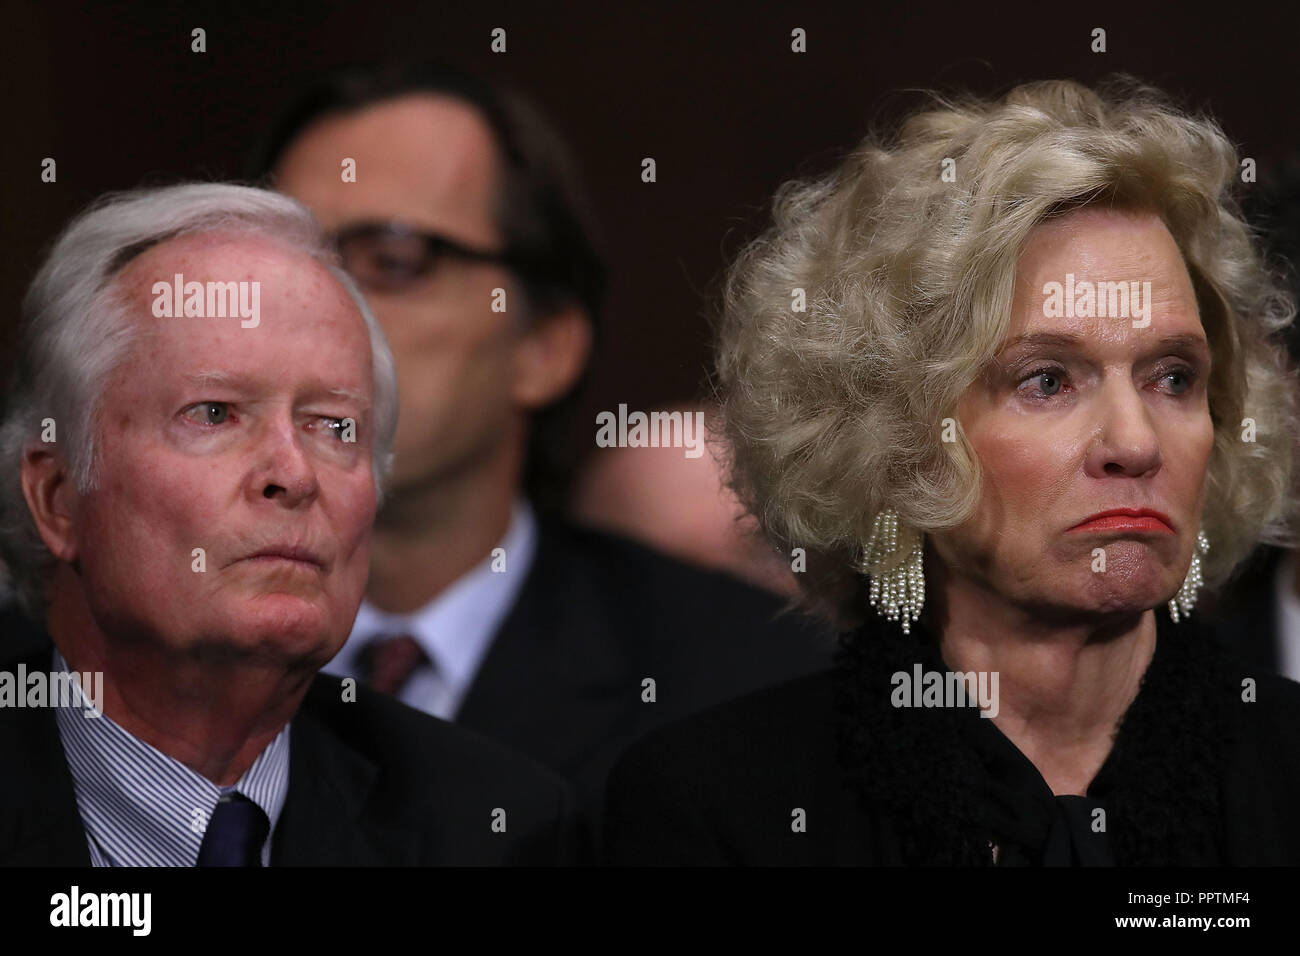 September 27, 2018 - Washington, District of Columbia, U.S. - Judge Brett Kavanaugh's parents, Everett and Martha Kavanaugh, listen to their son testify before the Senate Judiciary Committee during his Supreme Court confirmation hearing in the Dirksen Senate Office Building on Capitol Hill September 27, 2018 in Washington, DC. Kavanaugh was called back to testify about claims by Christine Blasey Ford, who has accused him of sexually assaulting her during a party in 1982 when they were high school students in suburban Maryland. (Credit Image: © Win Mcnamee/CNP via ZUMA Wire) Stock Photo